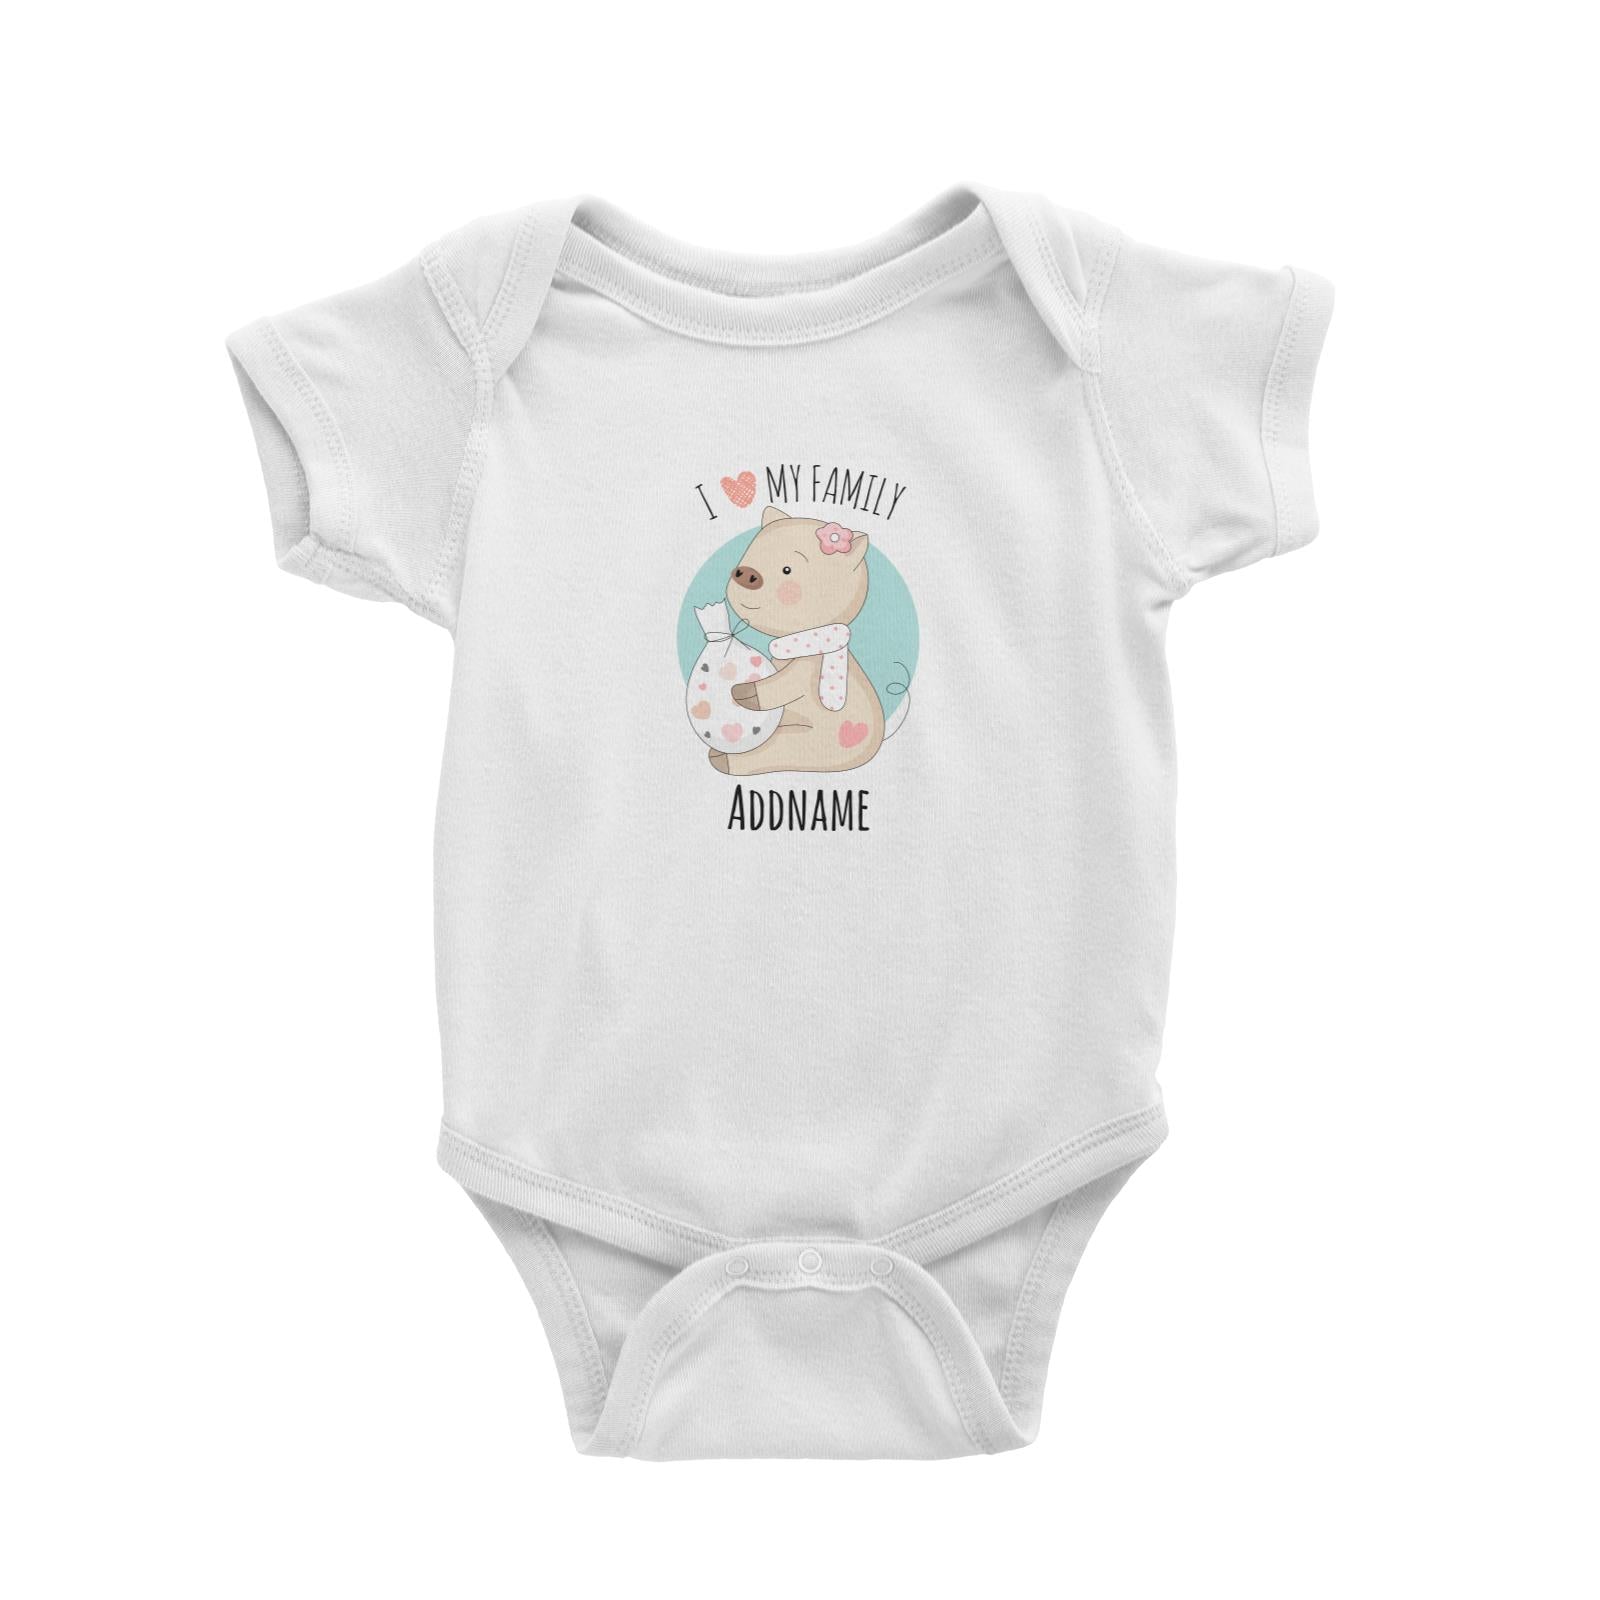 Sweet Animals Sketches Pig I Love My Family Addname Baby Romper